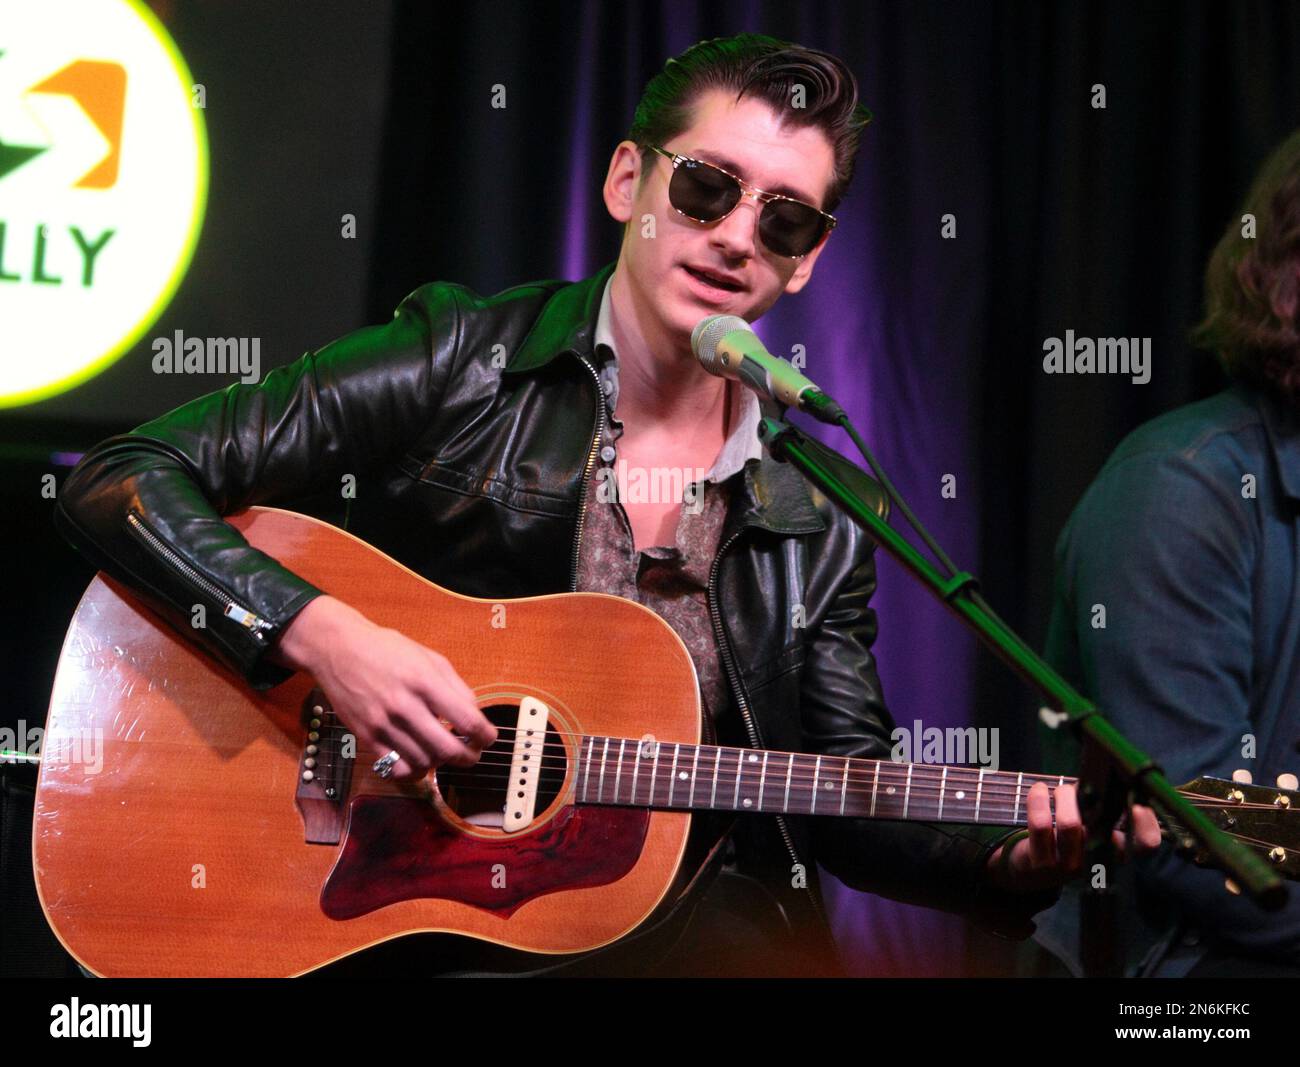 Alex Turner of the English indie rock band Arctic Monkeys visits Radio  104.5 Performance Theater on Wednesday, Sept. 18, 2013, in Philadelphia.  (Photo by Owen Sweeney/Invision/AP Photo Stock - Alamy